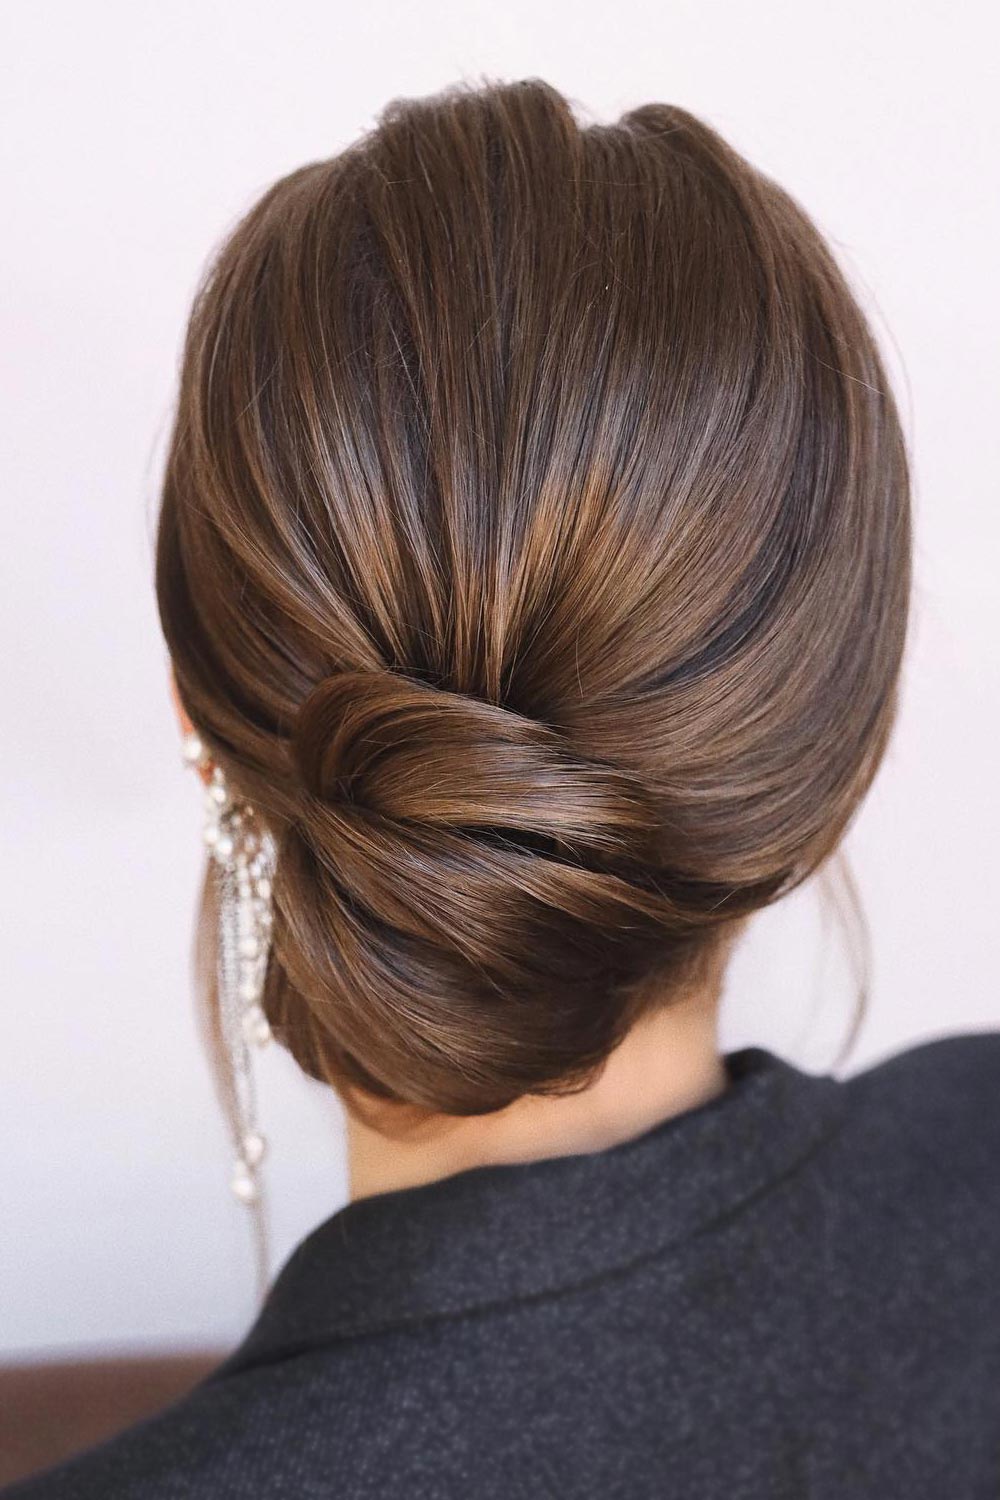 An updo is a miraculous hairstyle as you can wear it anywhere you go and it will be appropriate